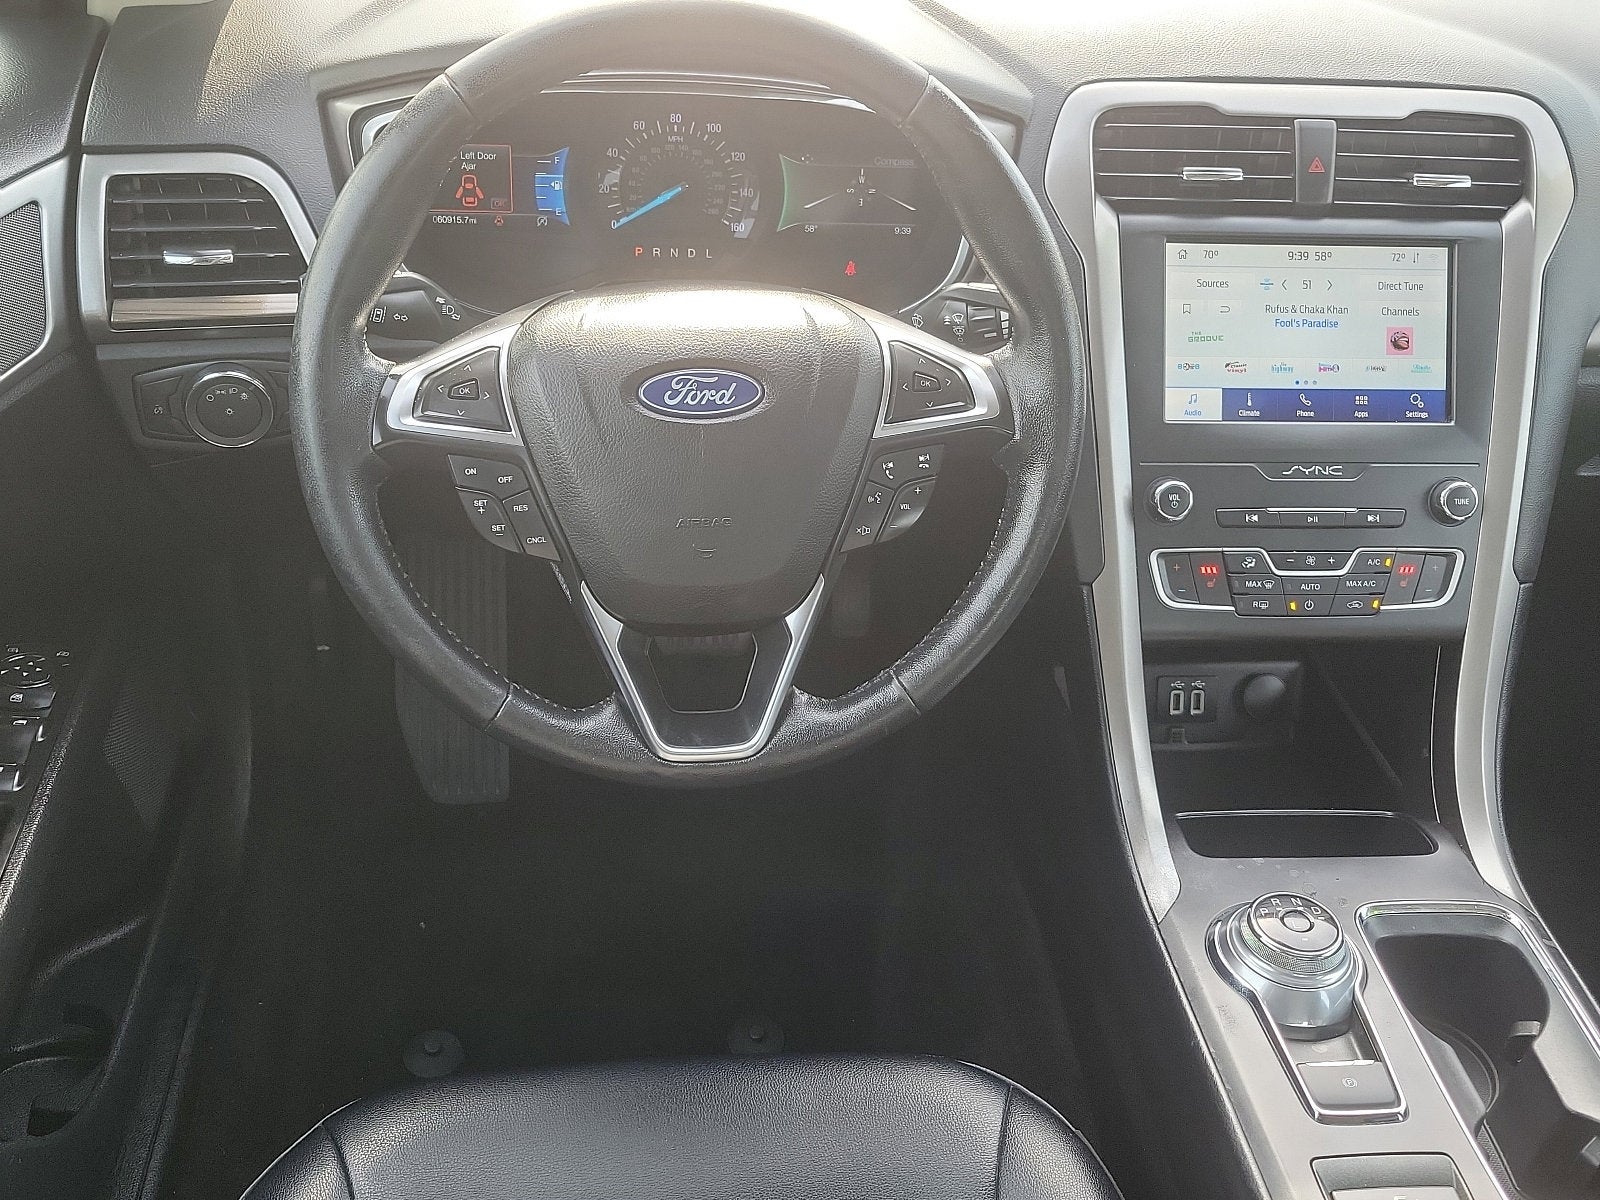 2020 Ford FUSION SEL